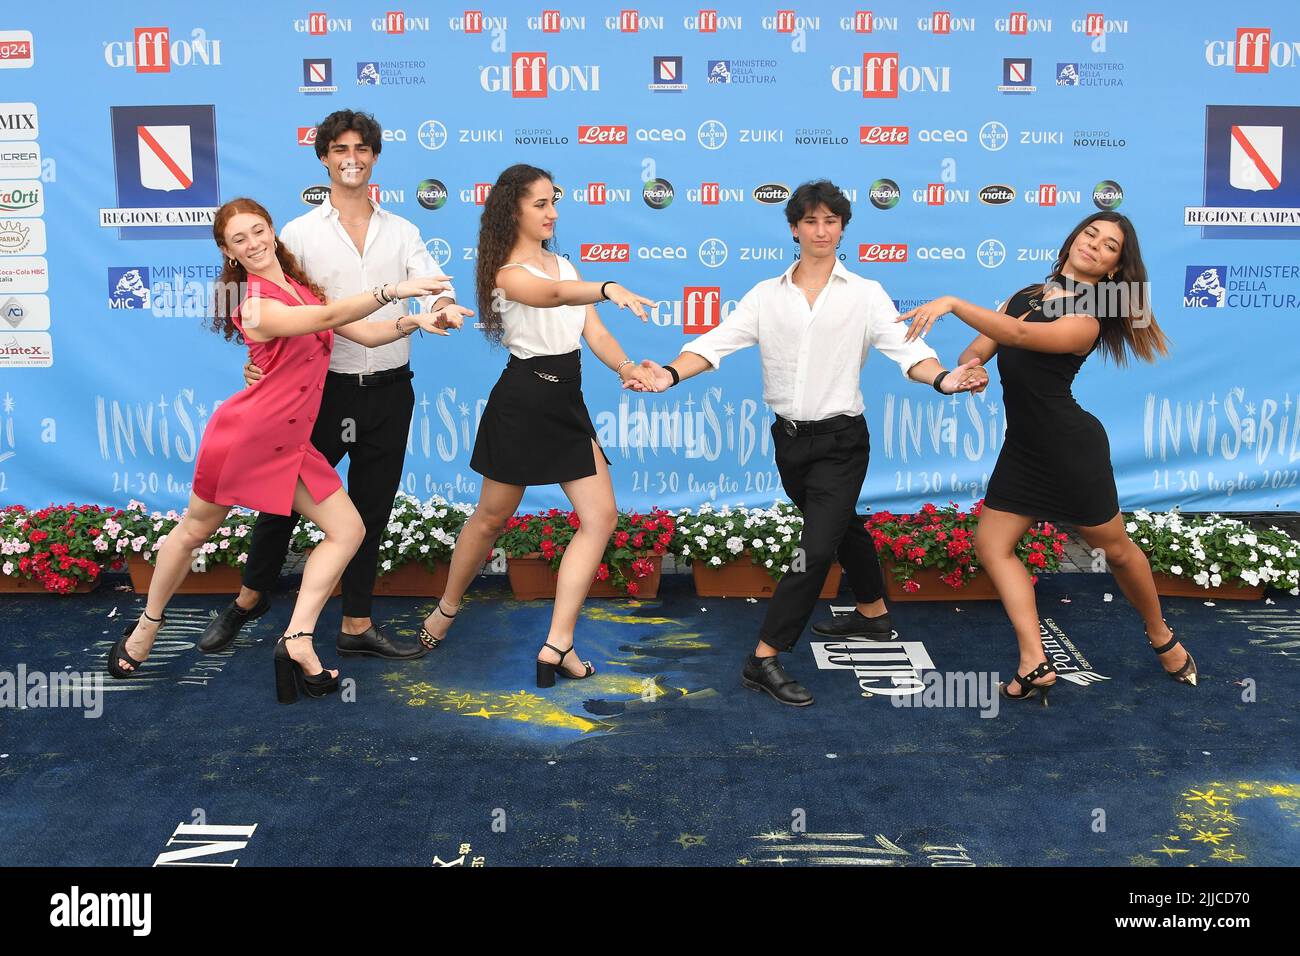 Giffoni Vallepiana, Italy. 23rd July, 2022. Giffoni Vallepiana Giiffoni  Film Festival Photocall "Edith Una Ballerina Alll" Inferno ", In the photo:  Viola Turelli with the corps de ballet Credit: Independent Photo  Agency/Alamy